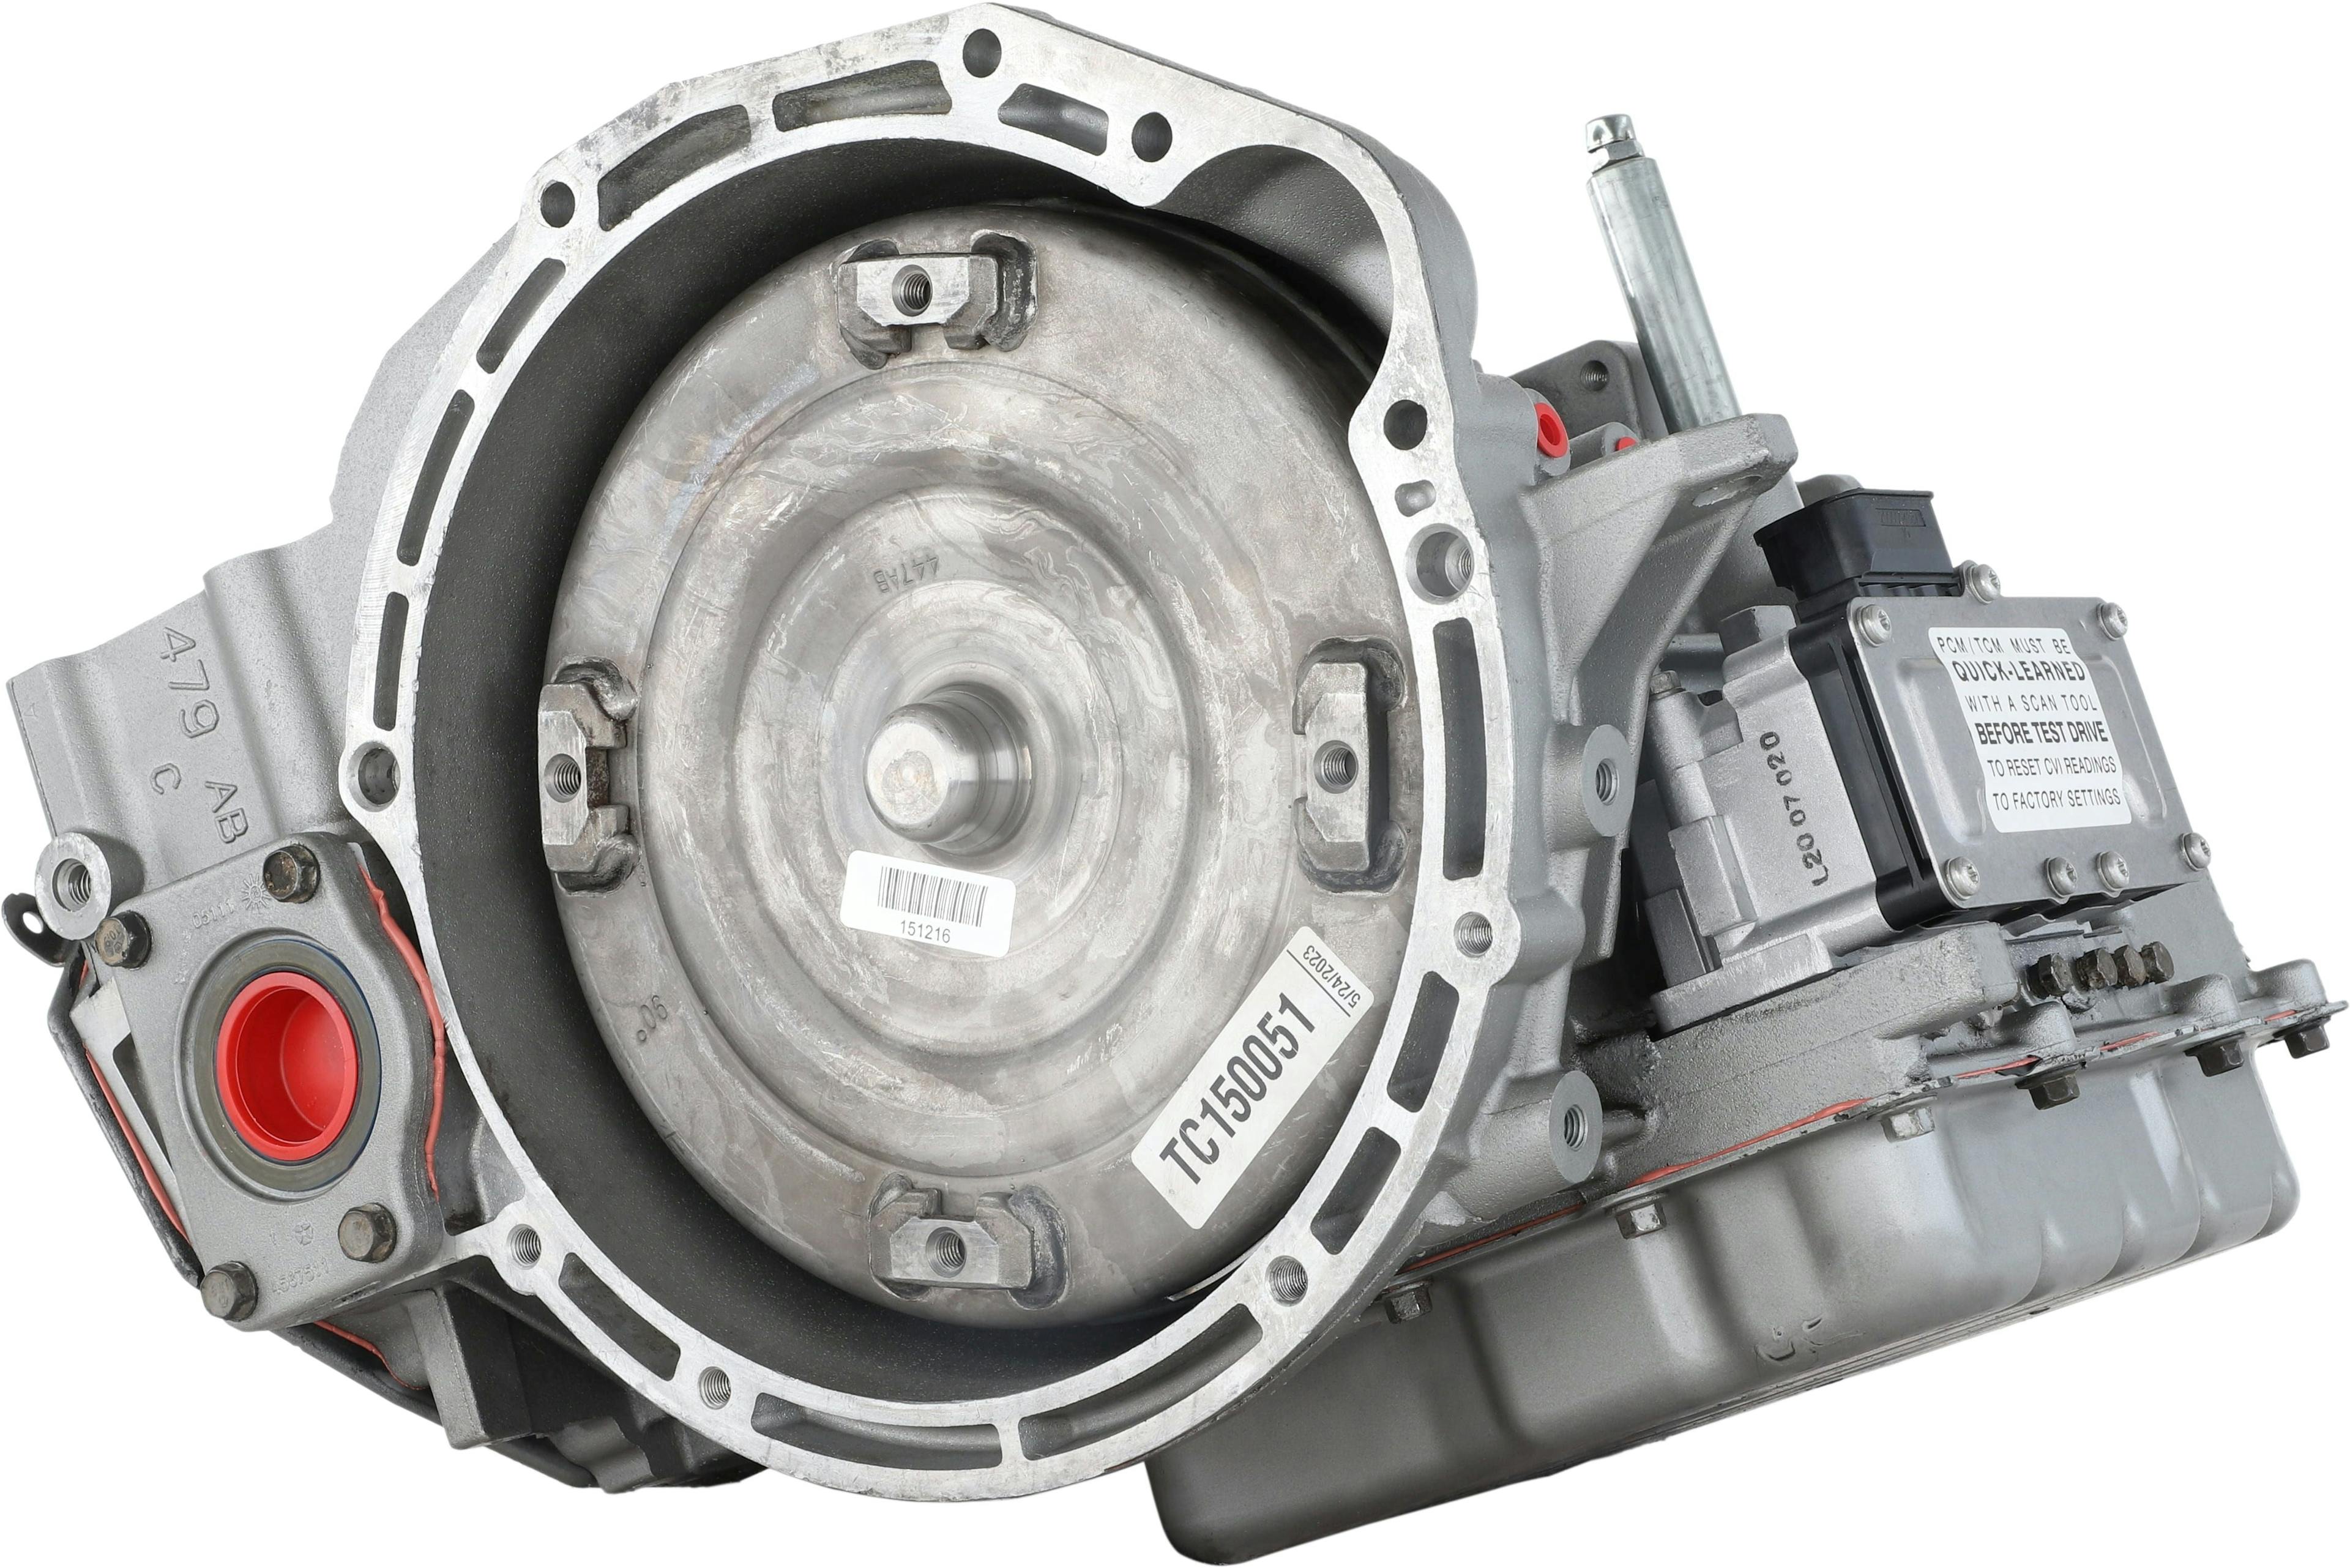 Automatic Transmission for 2009-2012 Chrysler 200/Sebring and Dodge Avenger FWD with 2.4L Inline-4 Engine